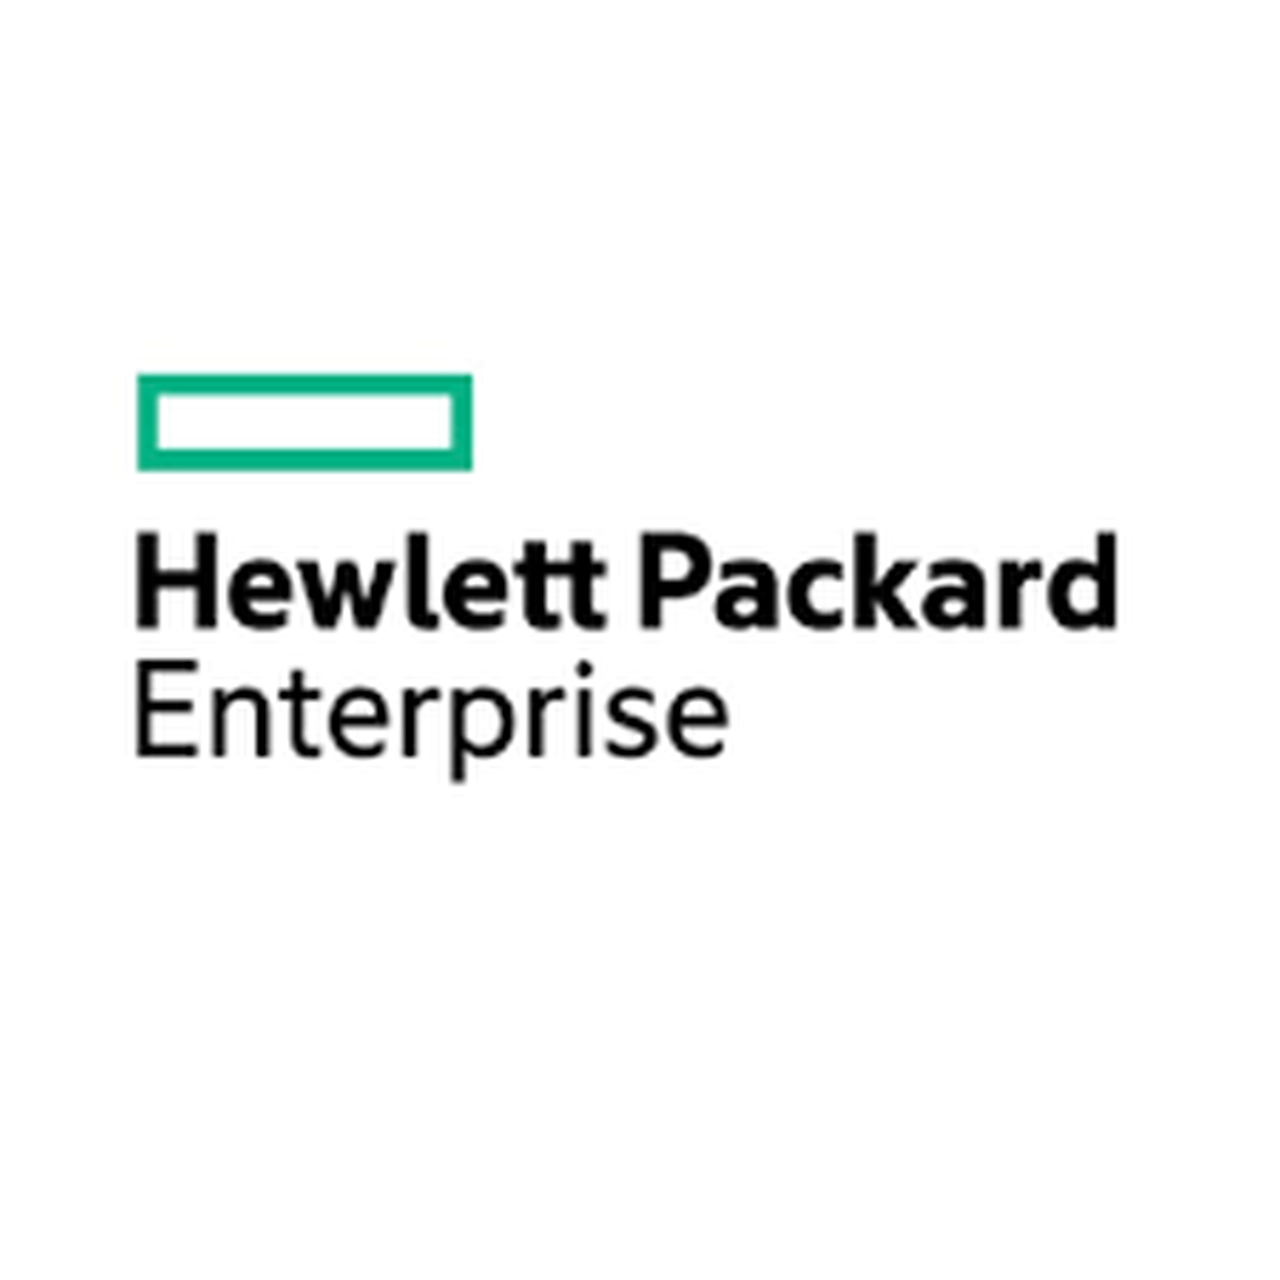 HPE Education Computer Networks Training